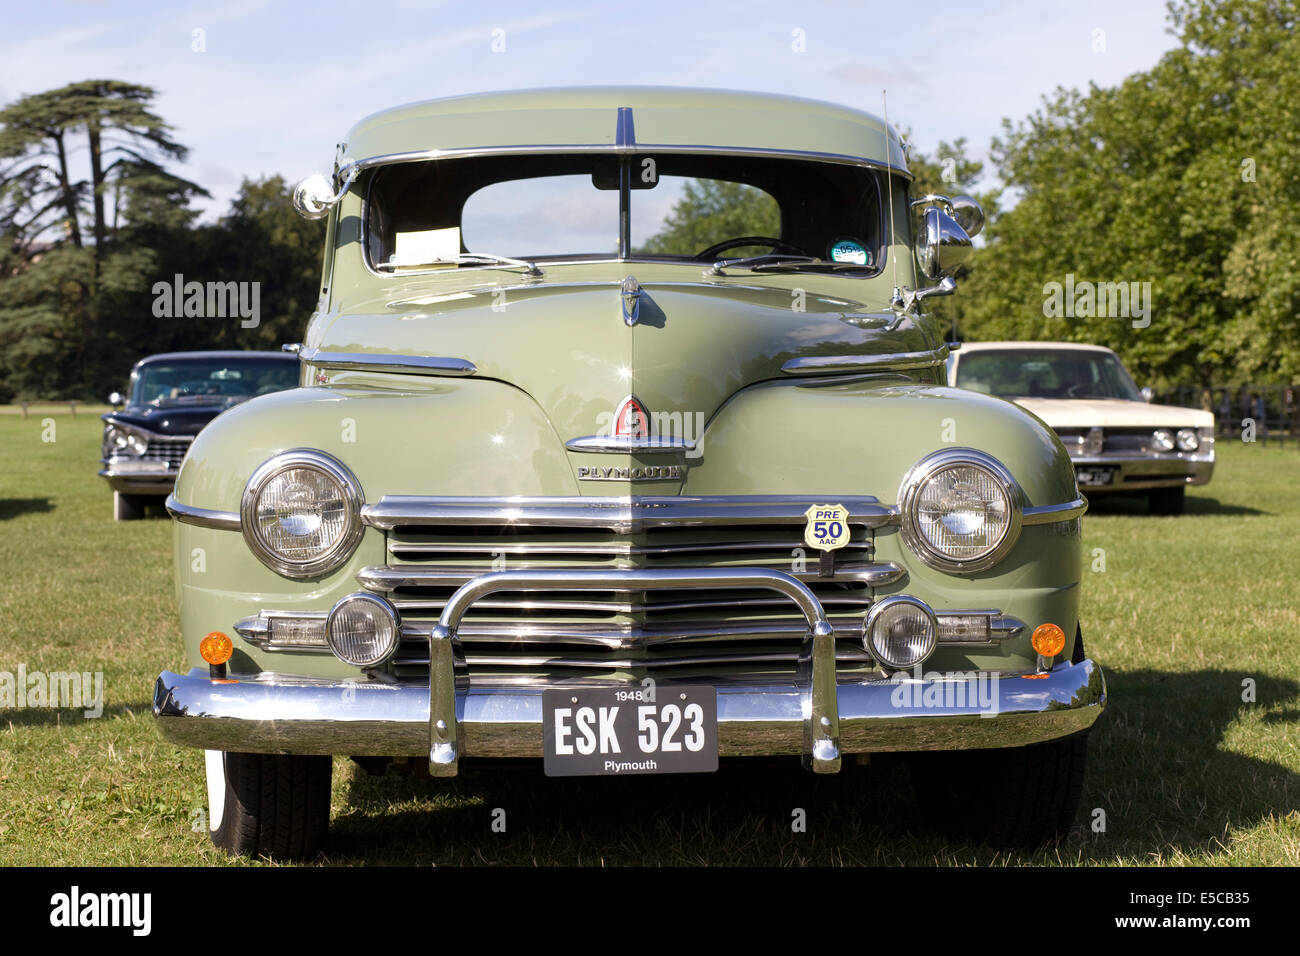 1940s to 1050s Plymouth Classic car Stock Photo